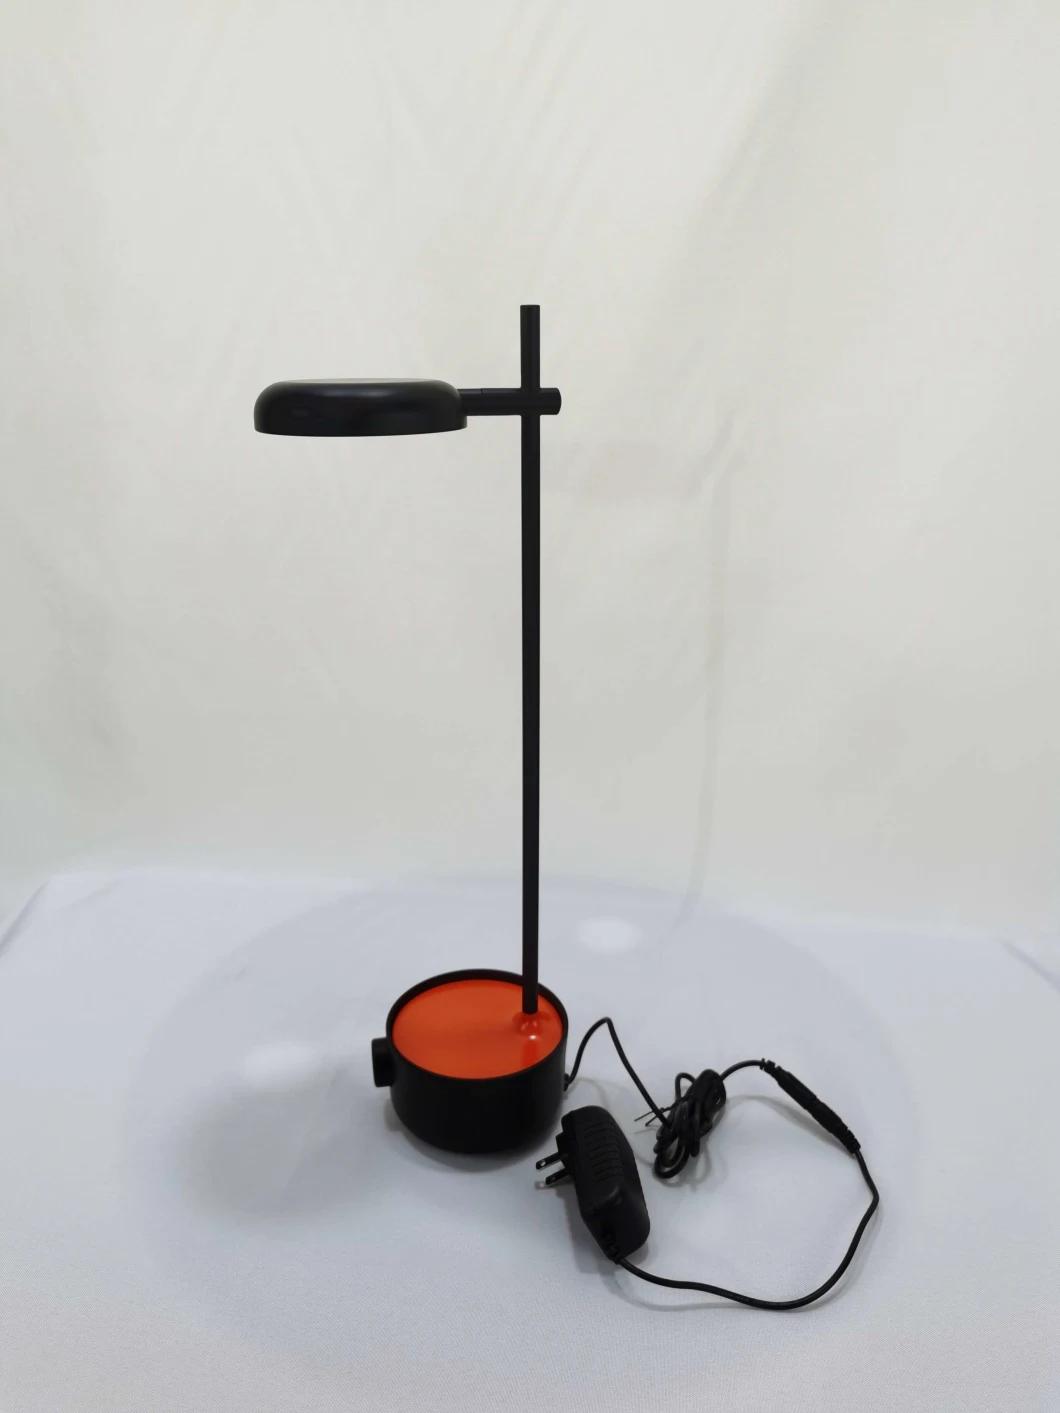 High Quality Popular Product Design Bedroom Lighting Dimmable Table Lamps for Sale